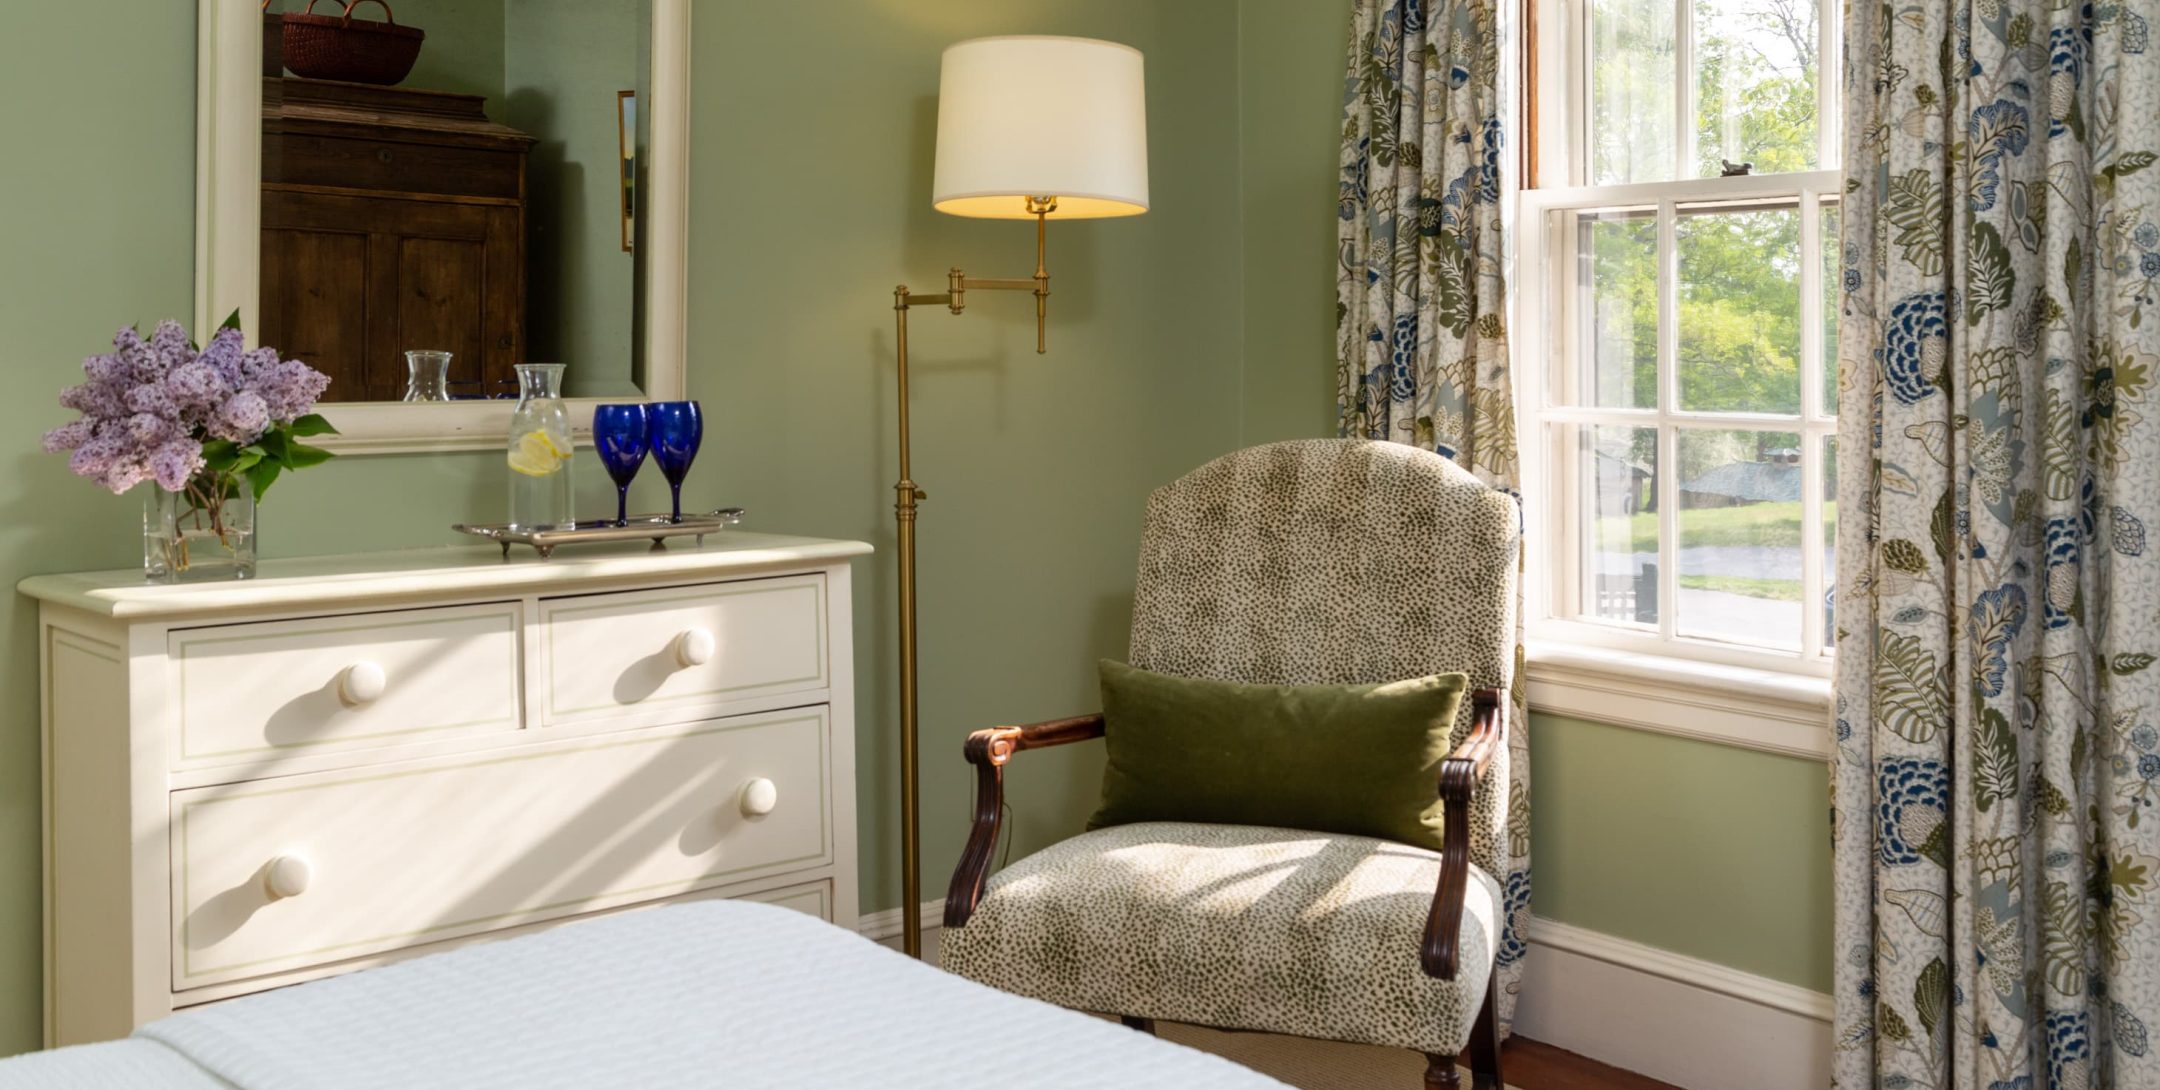 Reading chair by window in Choate Room at The Inn at Castle Hill